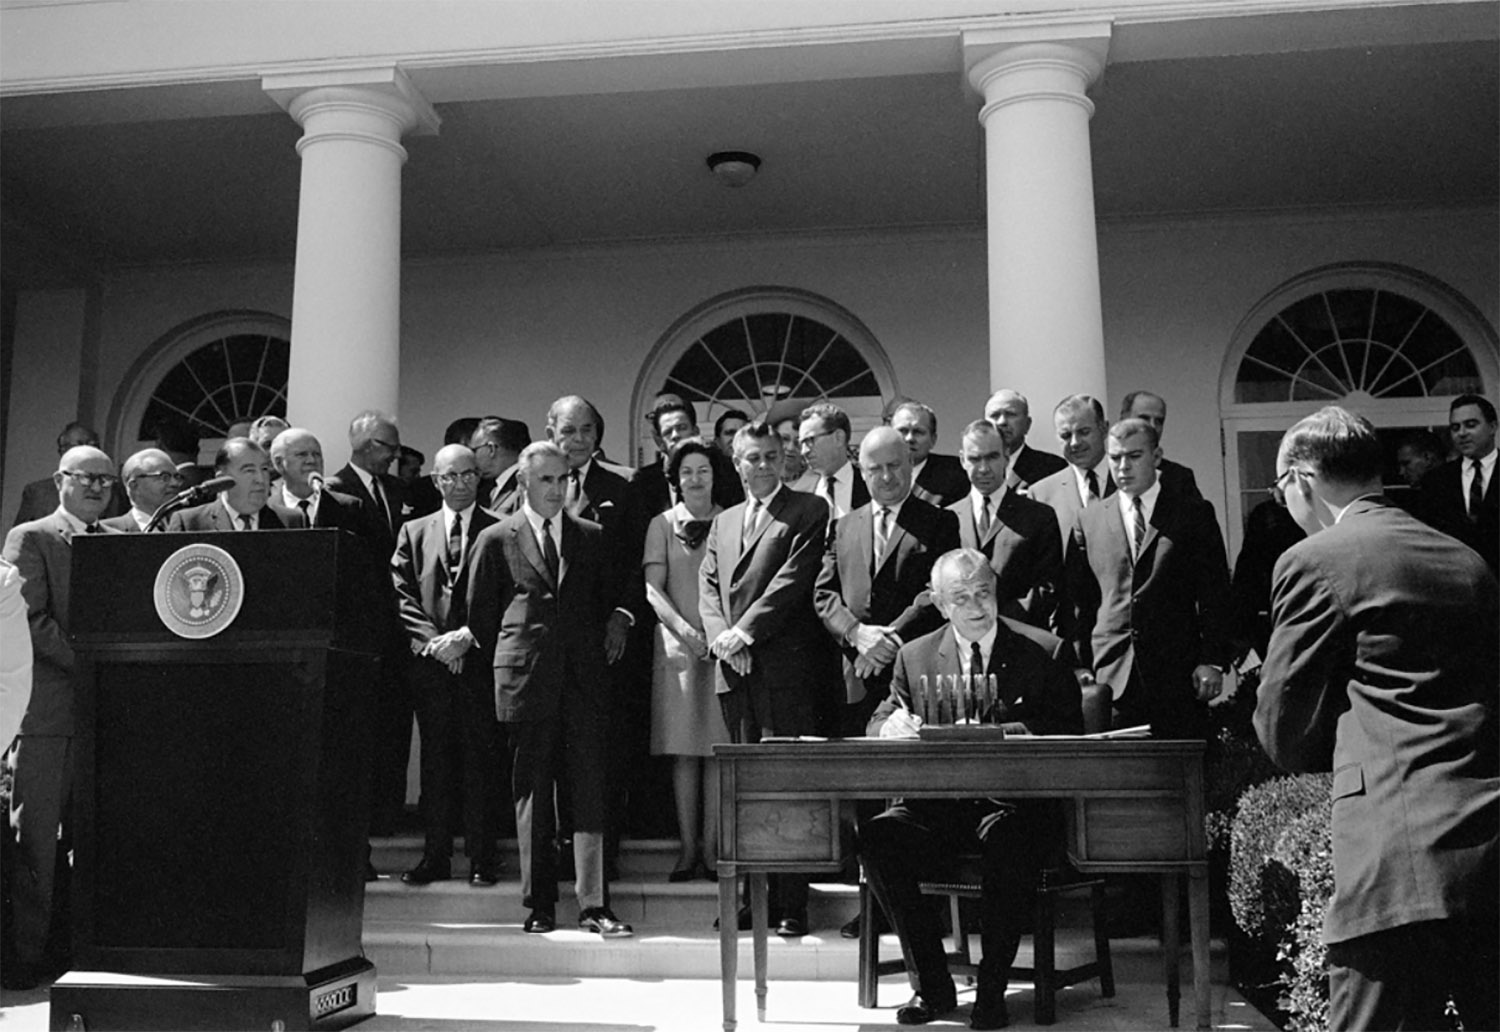 On September 9, 1966, around 200 people gathered in the White House Rose Garden as President Lyndon B. Johnson signed the Motor Traffic and Motor Vehicle Safety Act and the Highway Safety Act. 